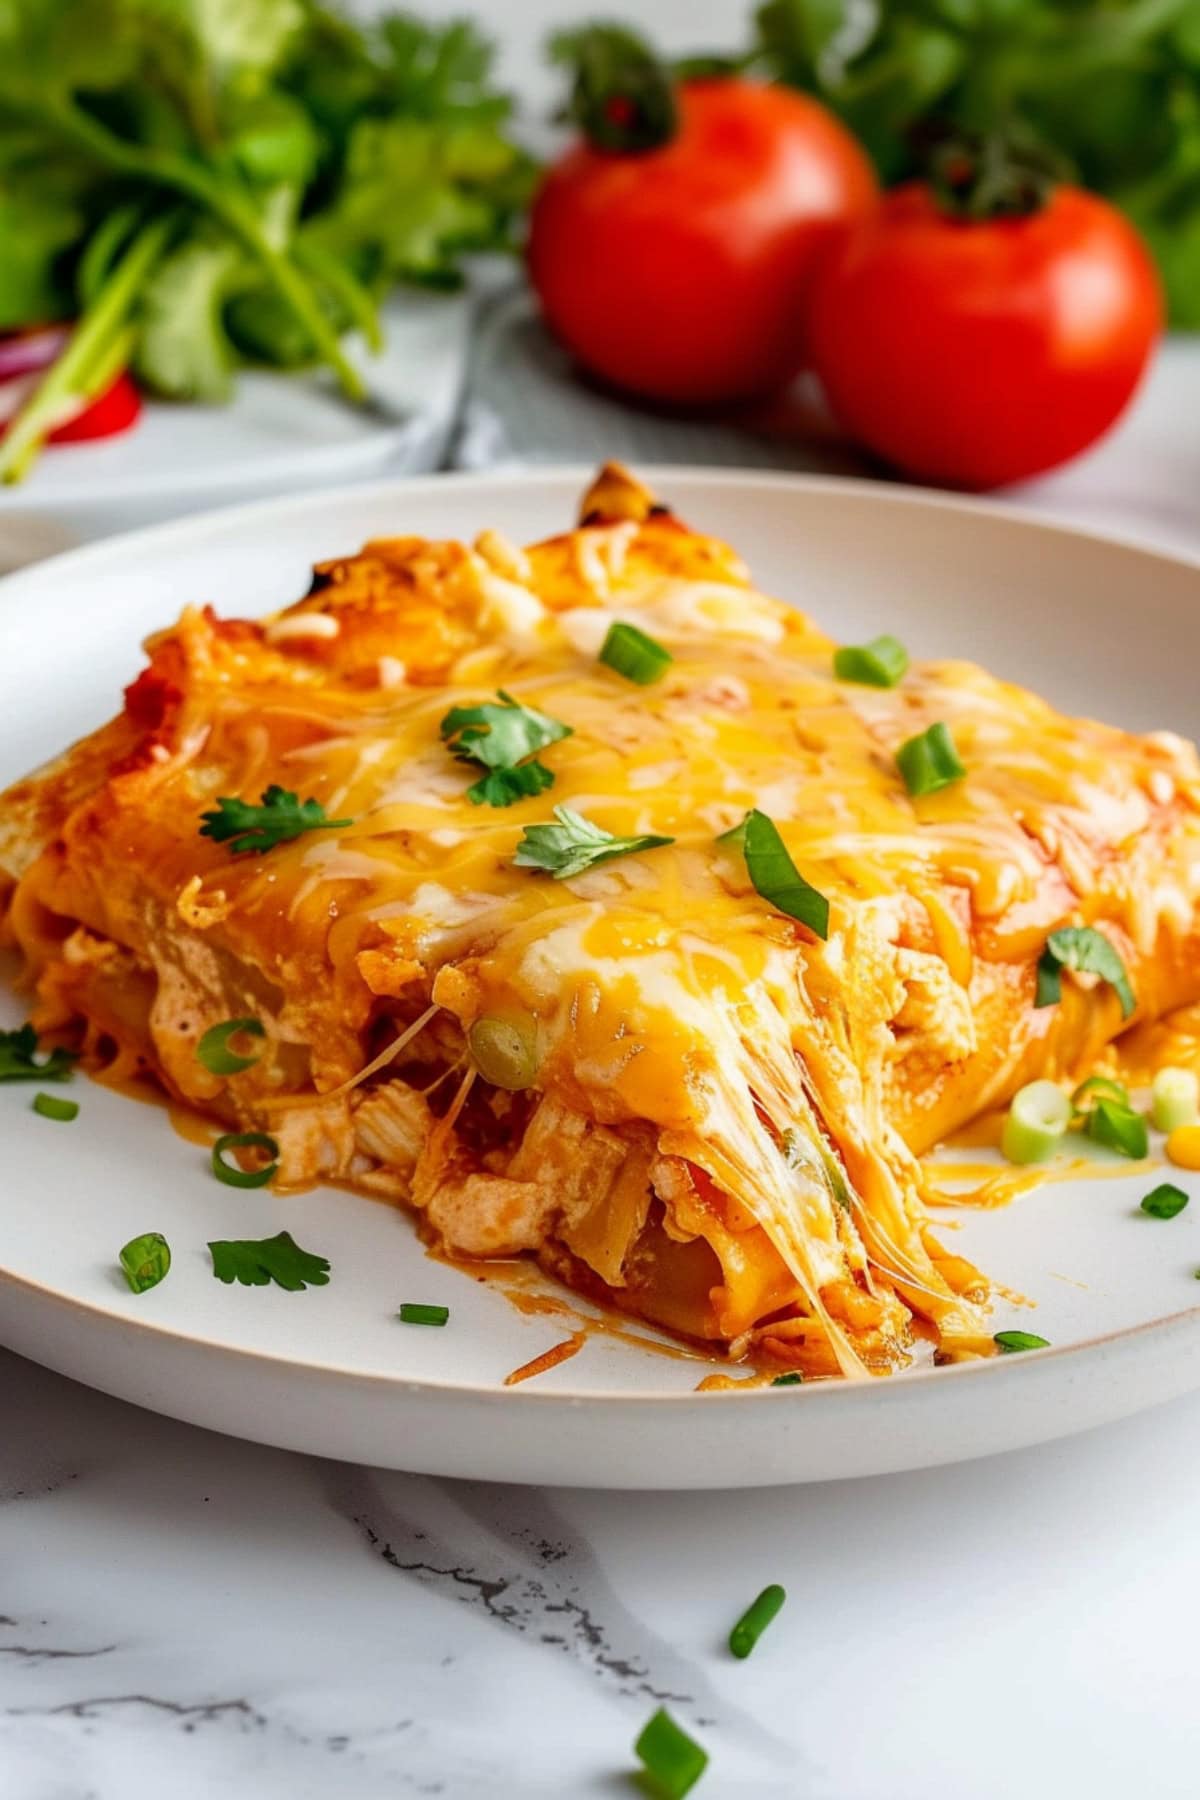 Cheesy chicken enchilada on a plate garnished with parsley.